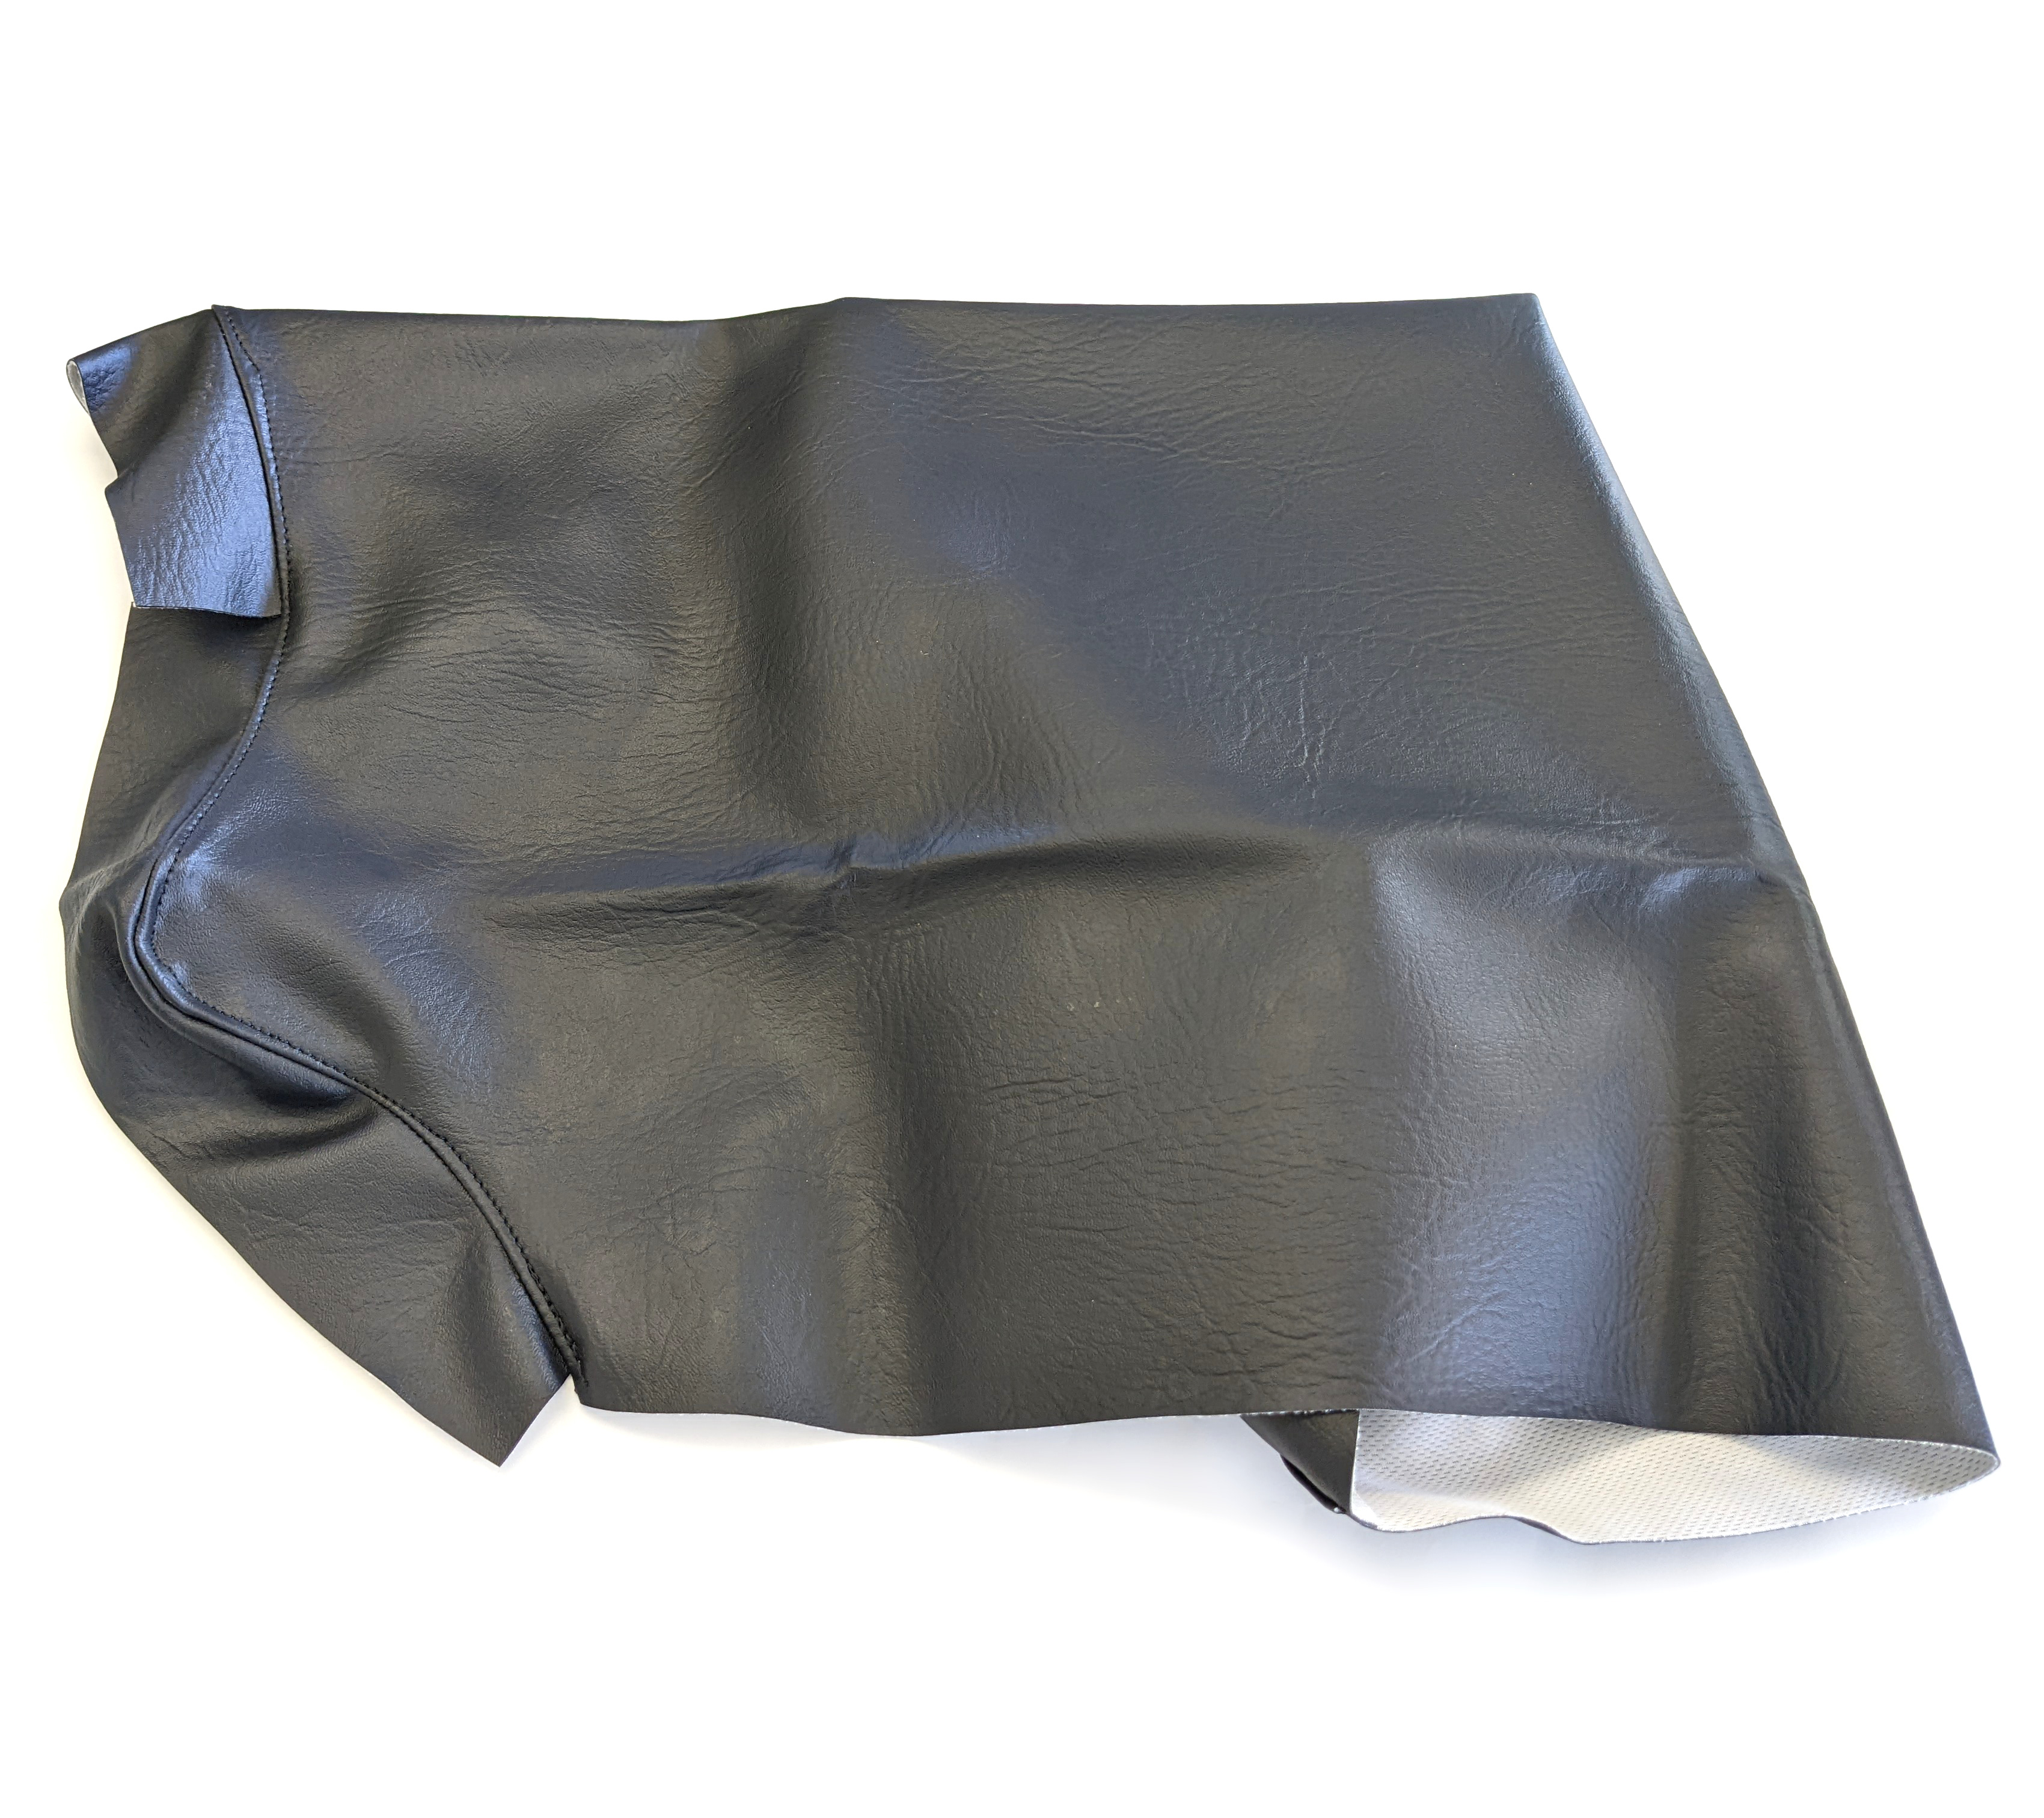 Black Seat Cover ONLY - For 02-09 Suzuki LTF250 Ozark - Click Image to Close